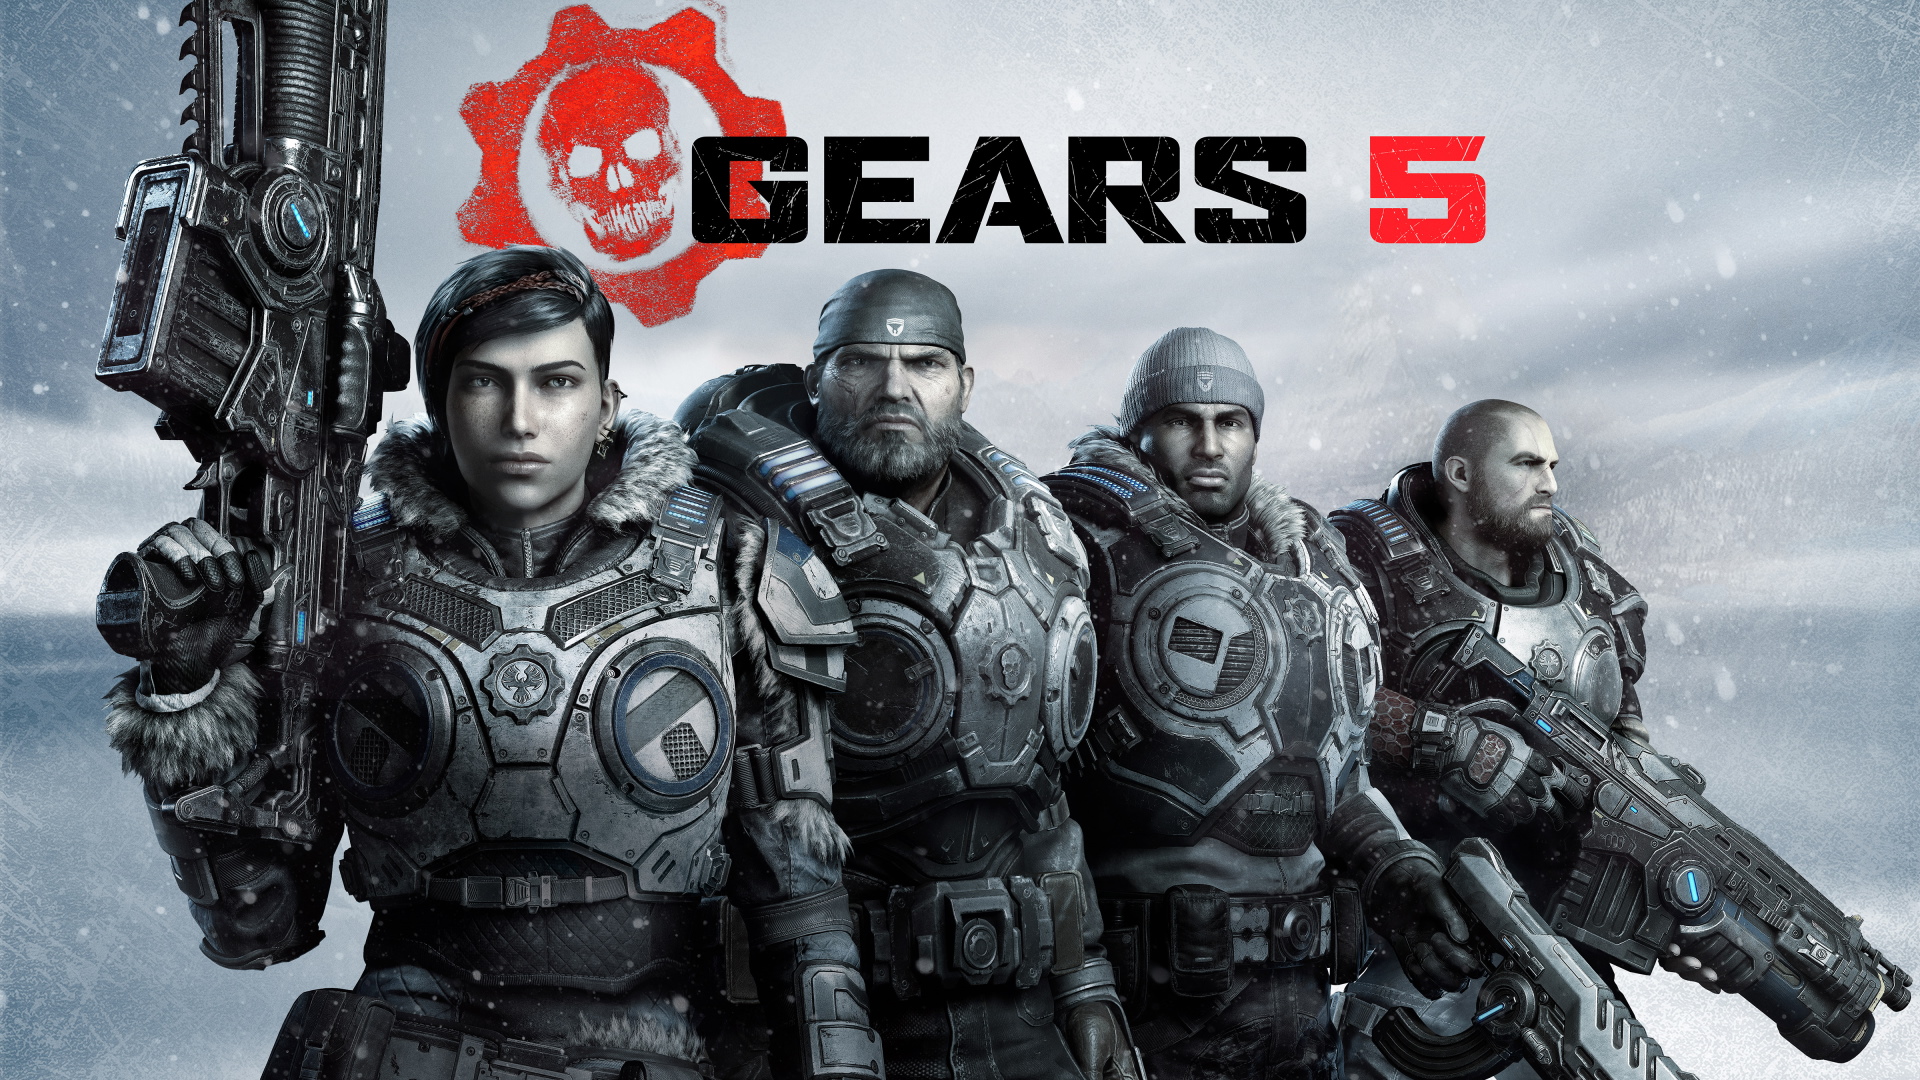 Gears 5 is only $5 at Best Buy right now — hurry!, The Gift Card Mayor, thegiftcardmayor.com